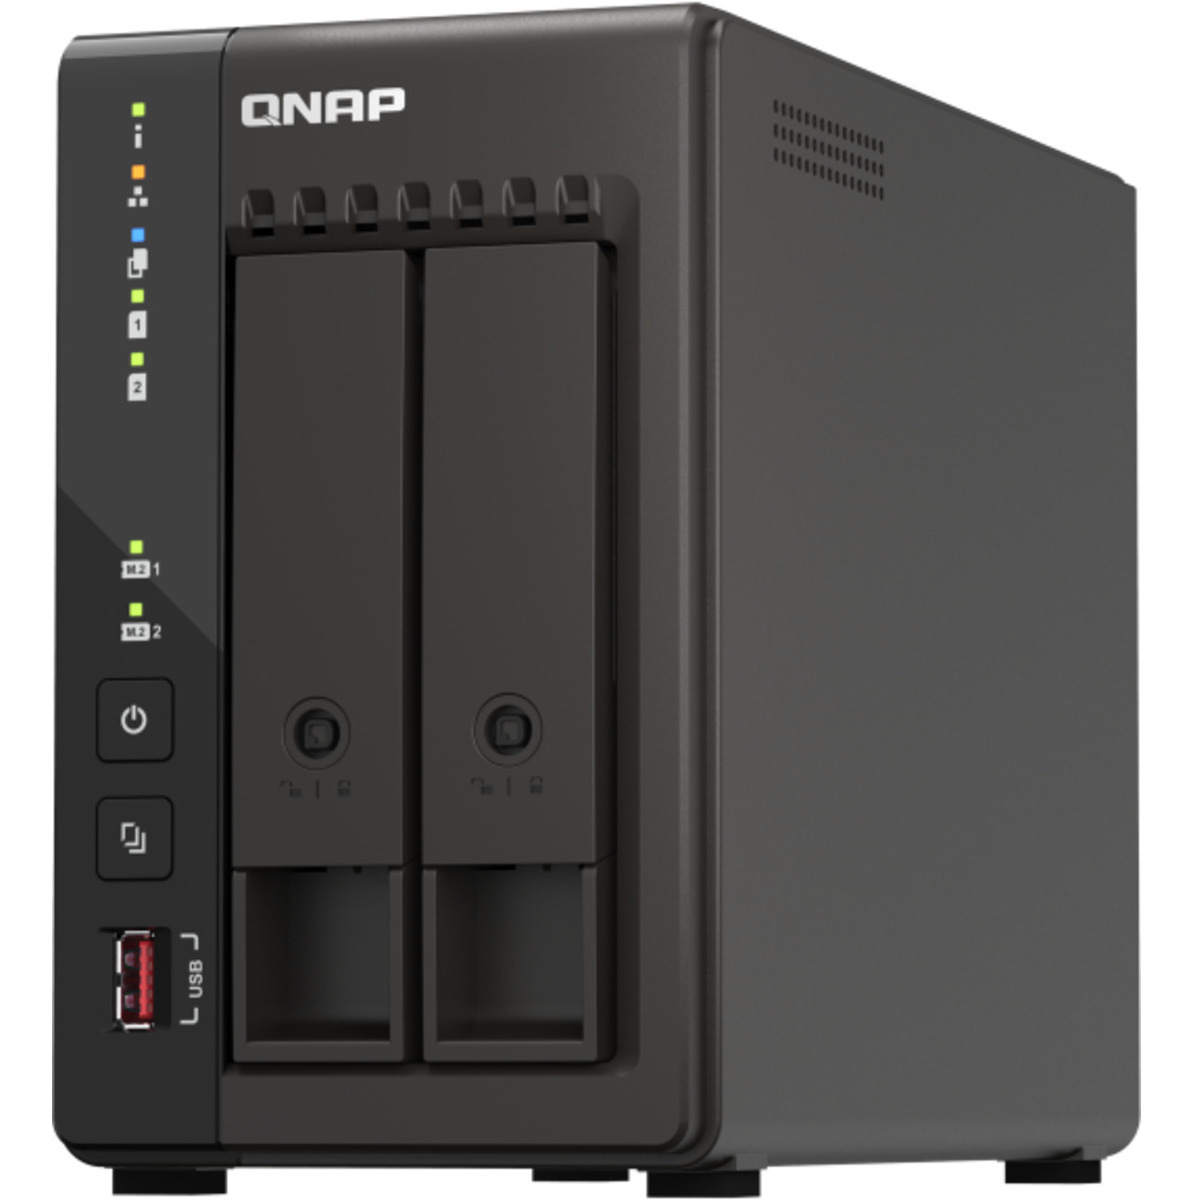 buy $1312 QNAP TS-253E 40tb Desktop NAS - Network Attached Storage Device 2x20000gb Seagate EXOS X20 ST20000NM007D 3.5 7200rpm SATA 6Gb/s HDD ENTERPRISE Class Drives Installed - Burn-In Tested - nas headquarters buy network attached storage server device das new raid-5 free shipping usa TS-253E